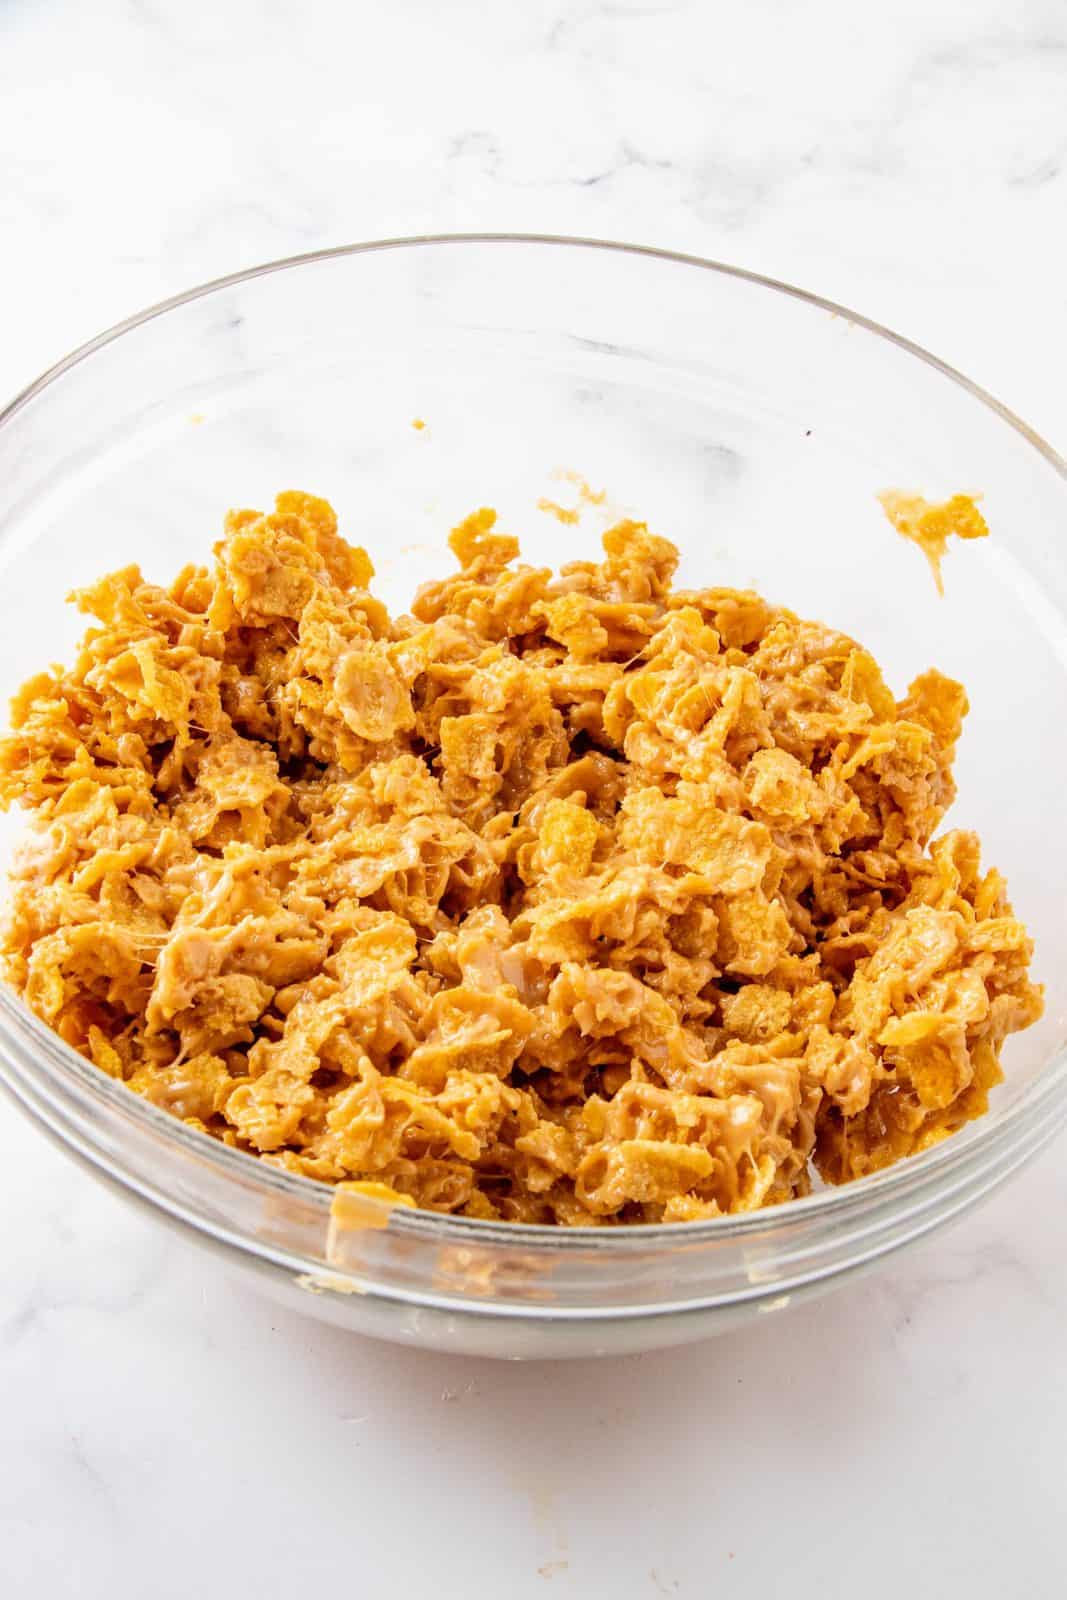 Corn syrup and peanut butter mixture poured over cornflakes and mixed together.